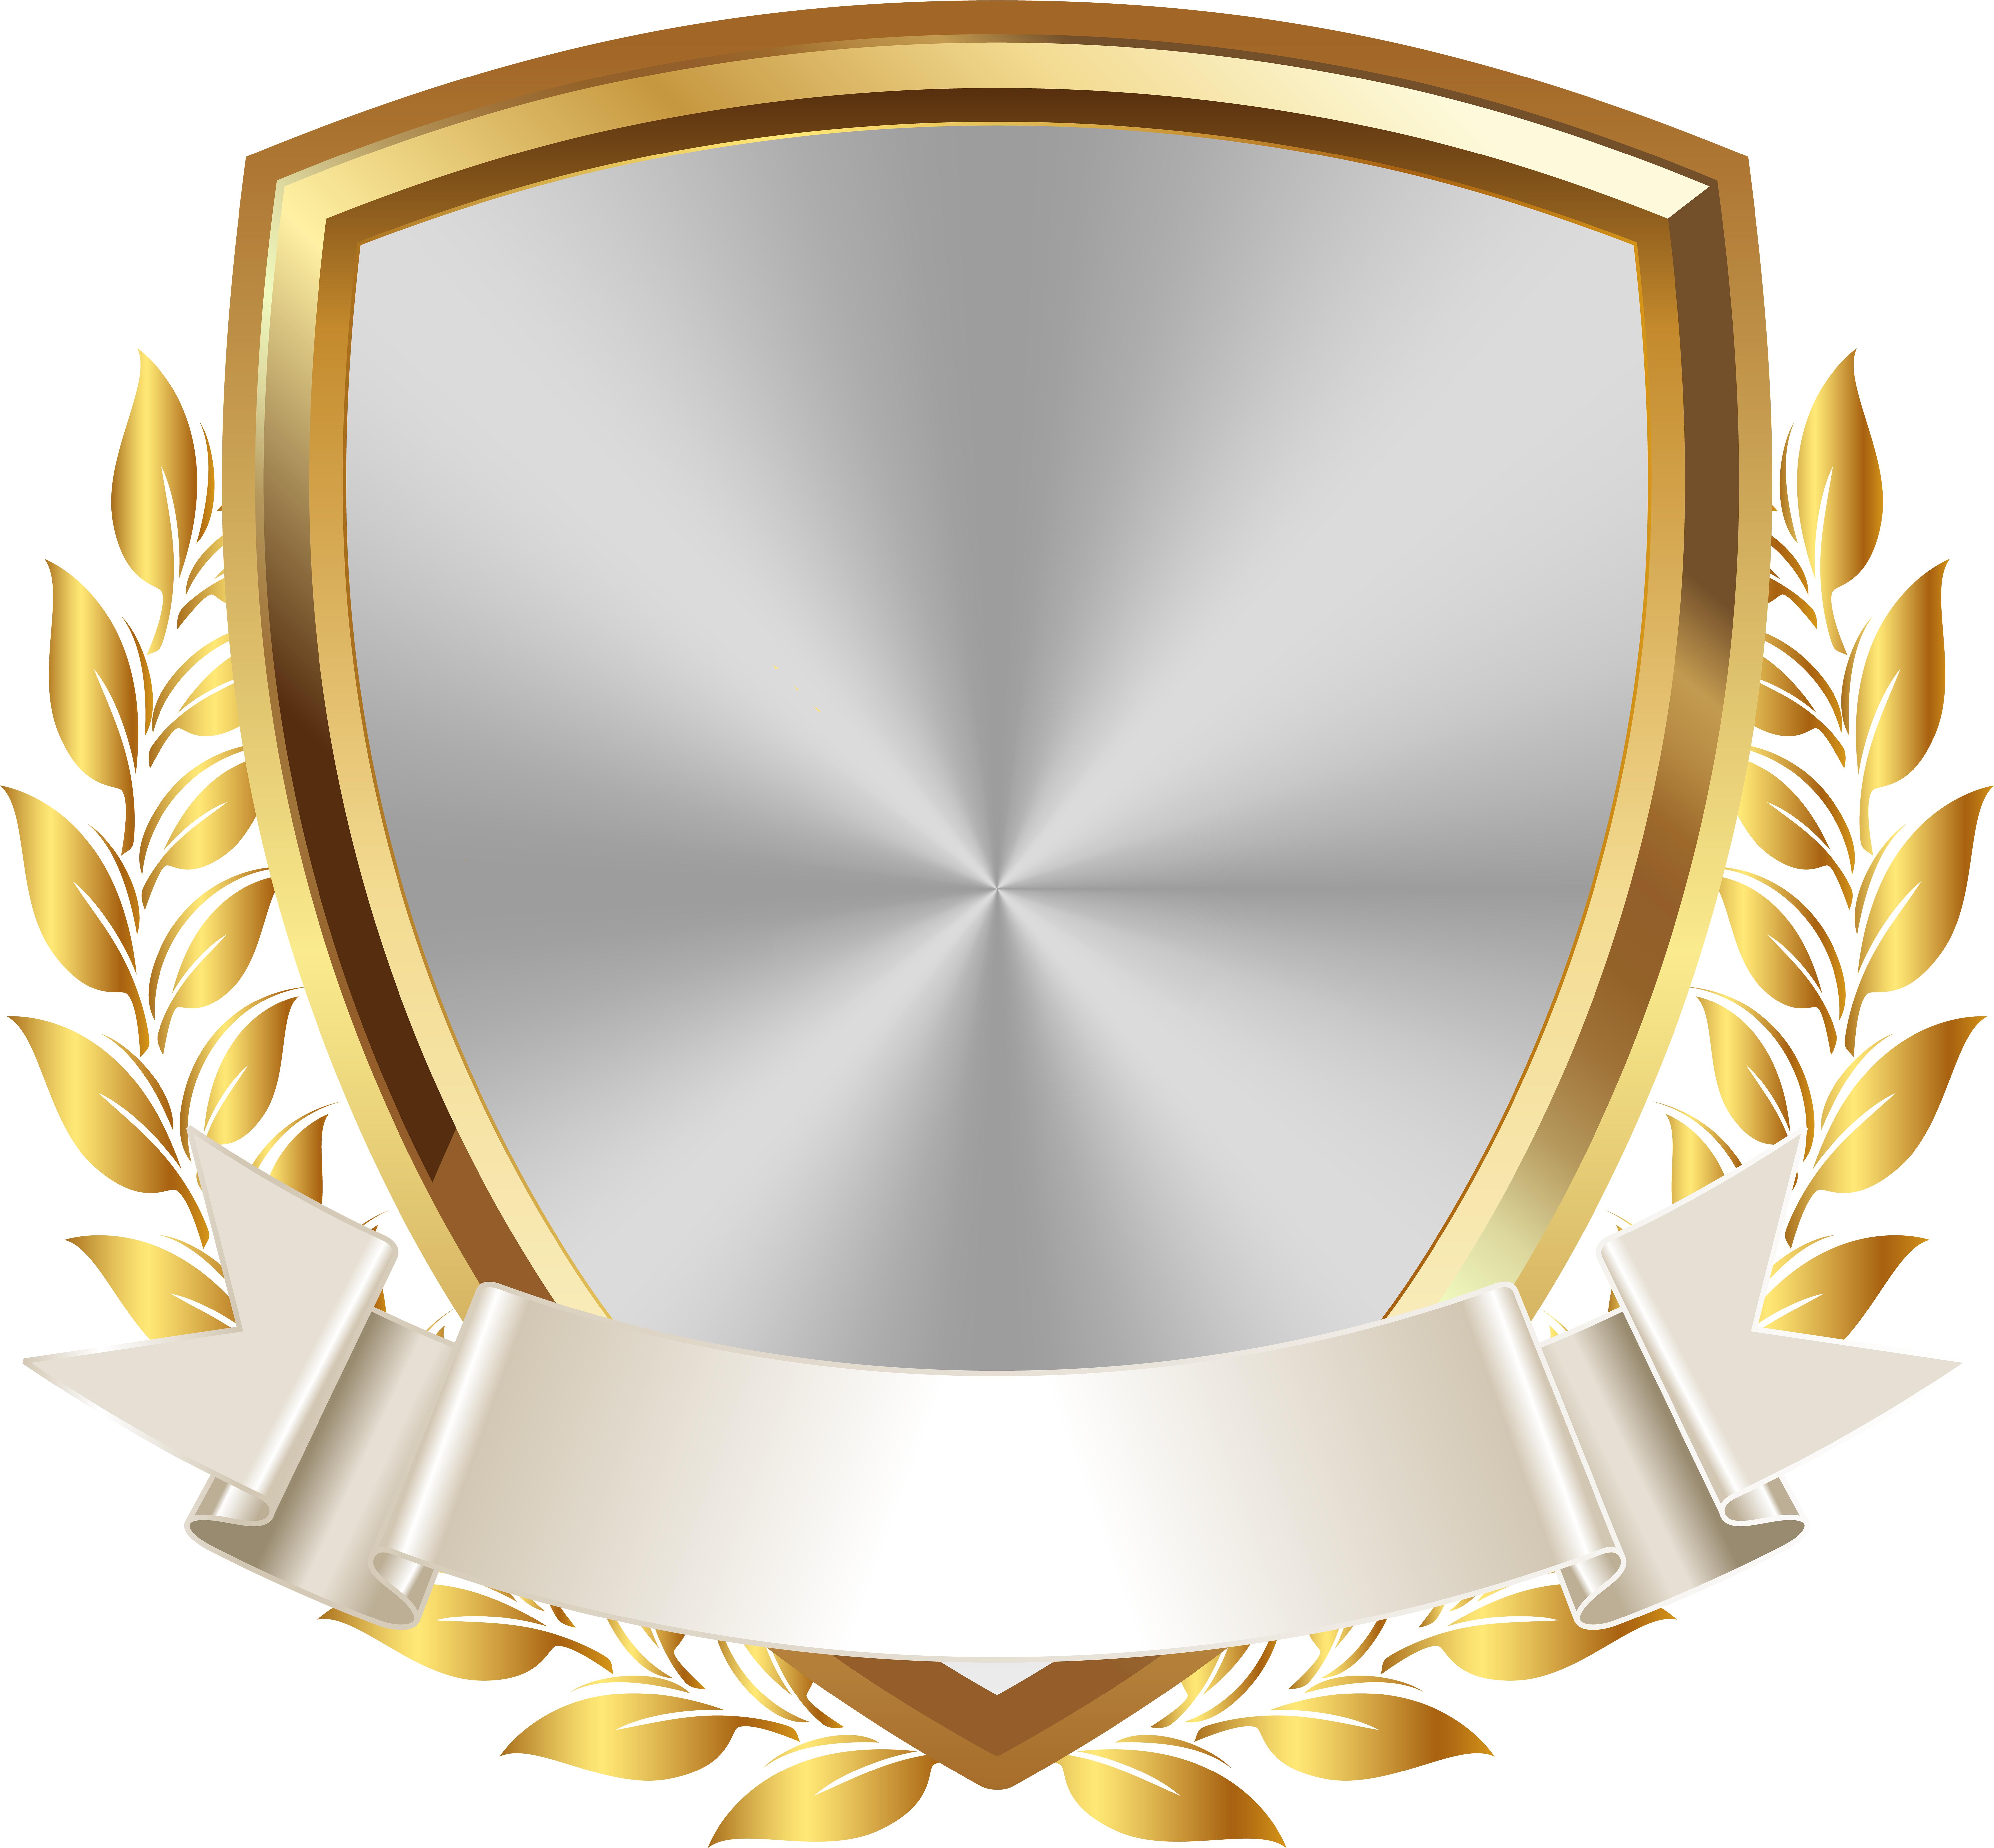 Gold White Badge With Banner Png Clip Art Image - Gold White Badge With Banner Png Clip Art Image (8000x7557)